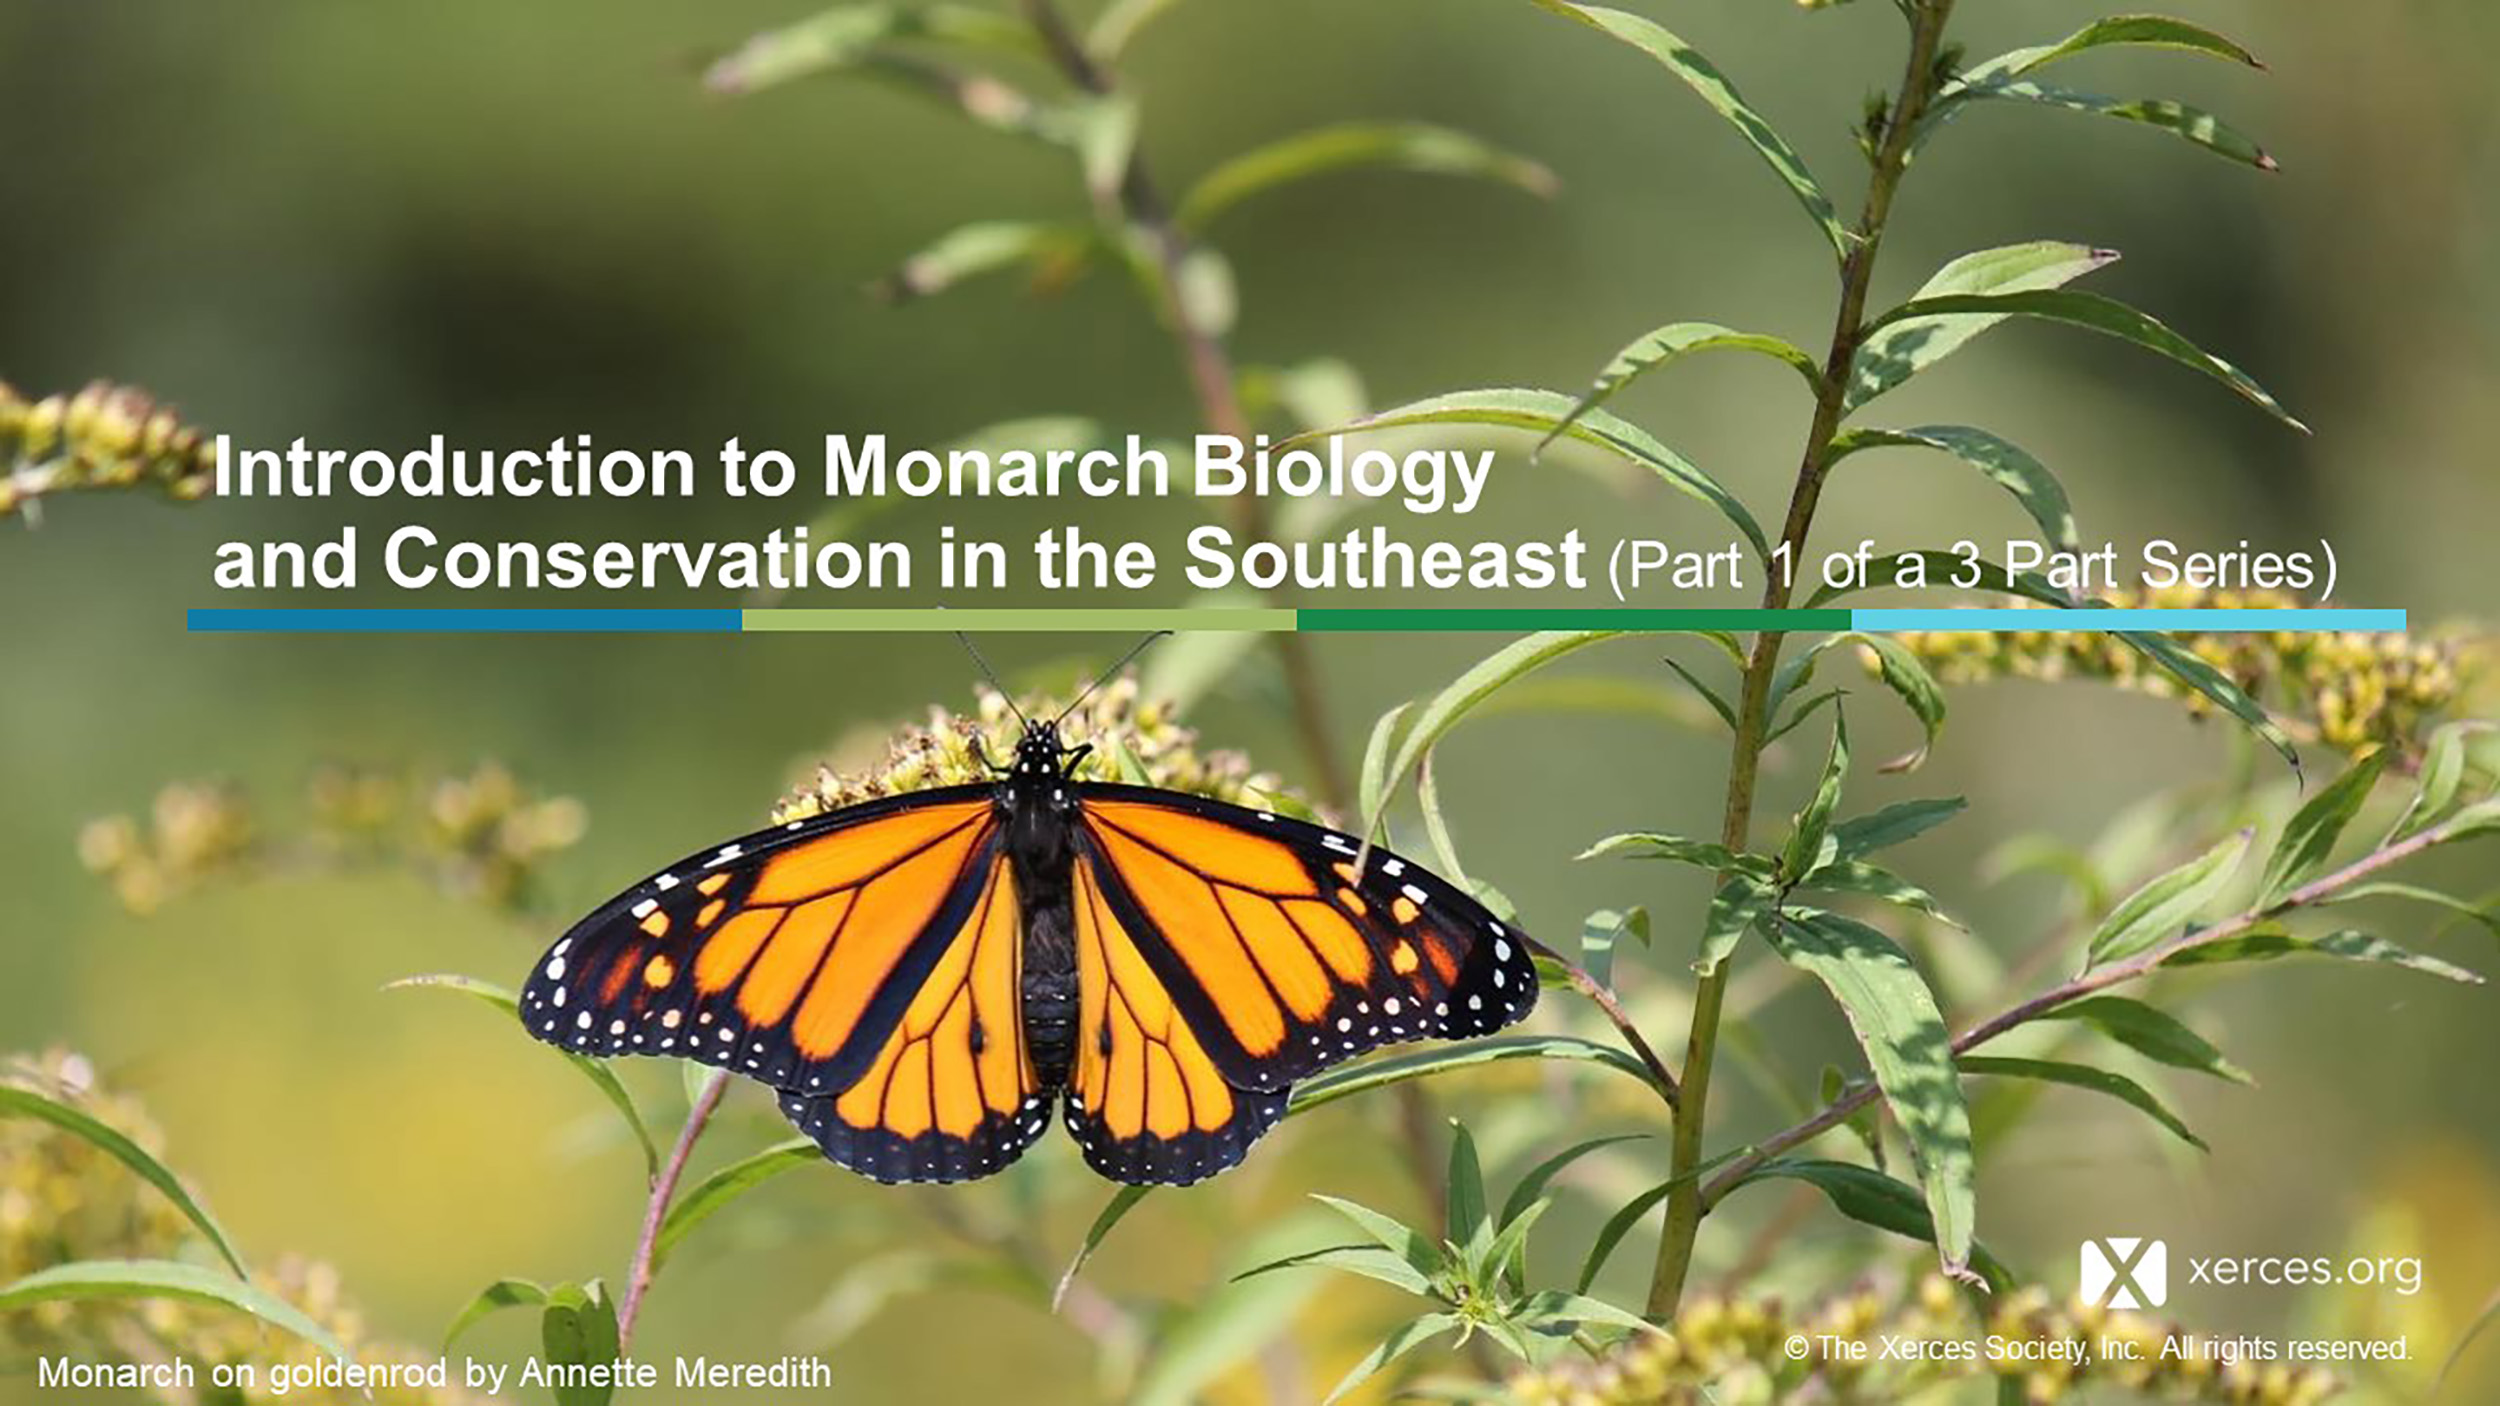 This image shows the first slide from a presentation. The slide has text and a photo of a black-and-orange monarch butterfly